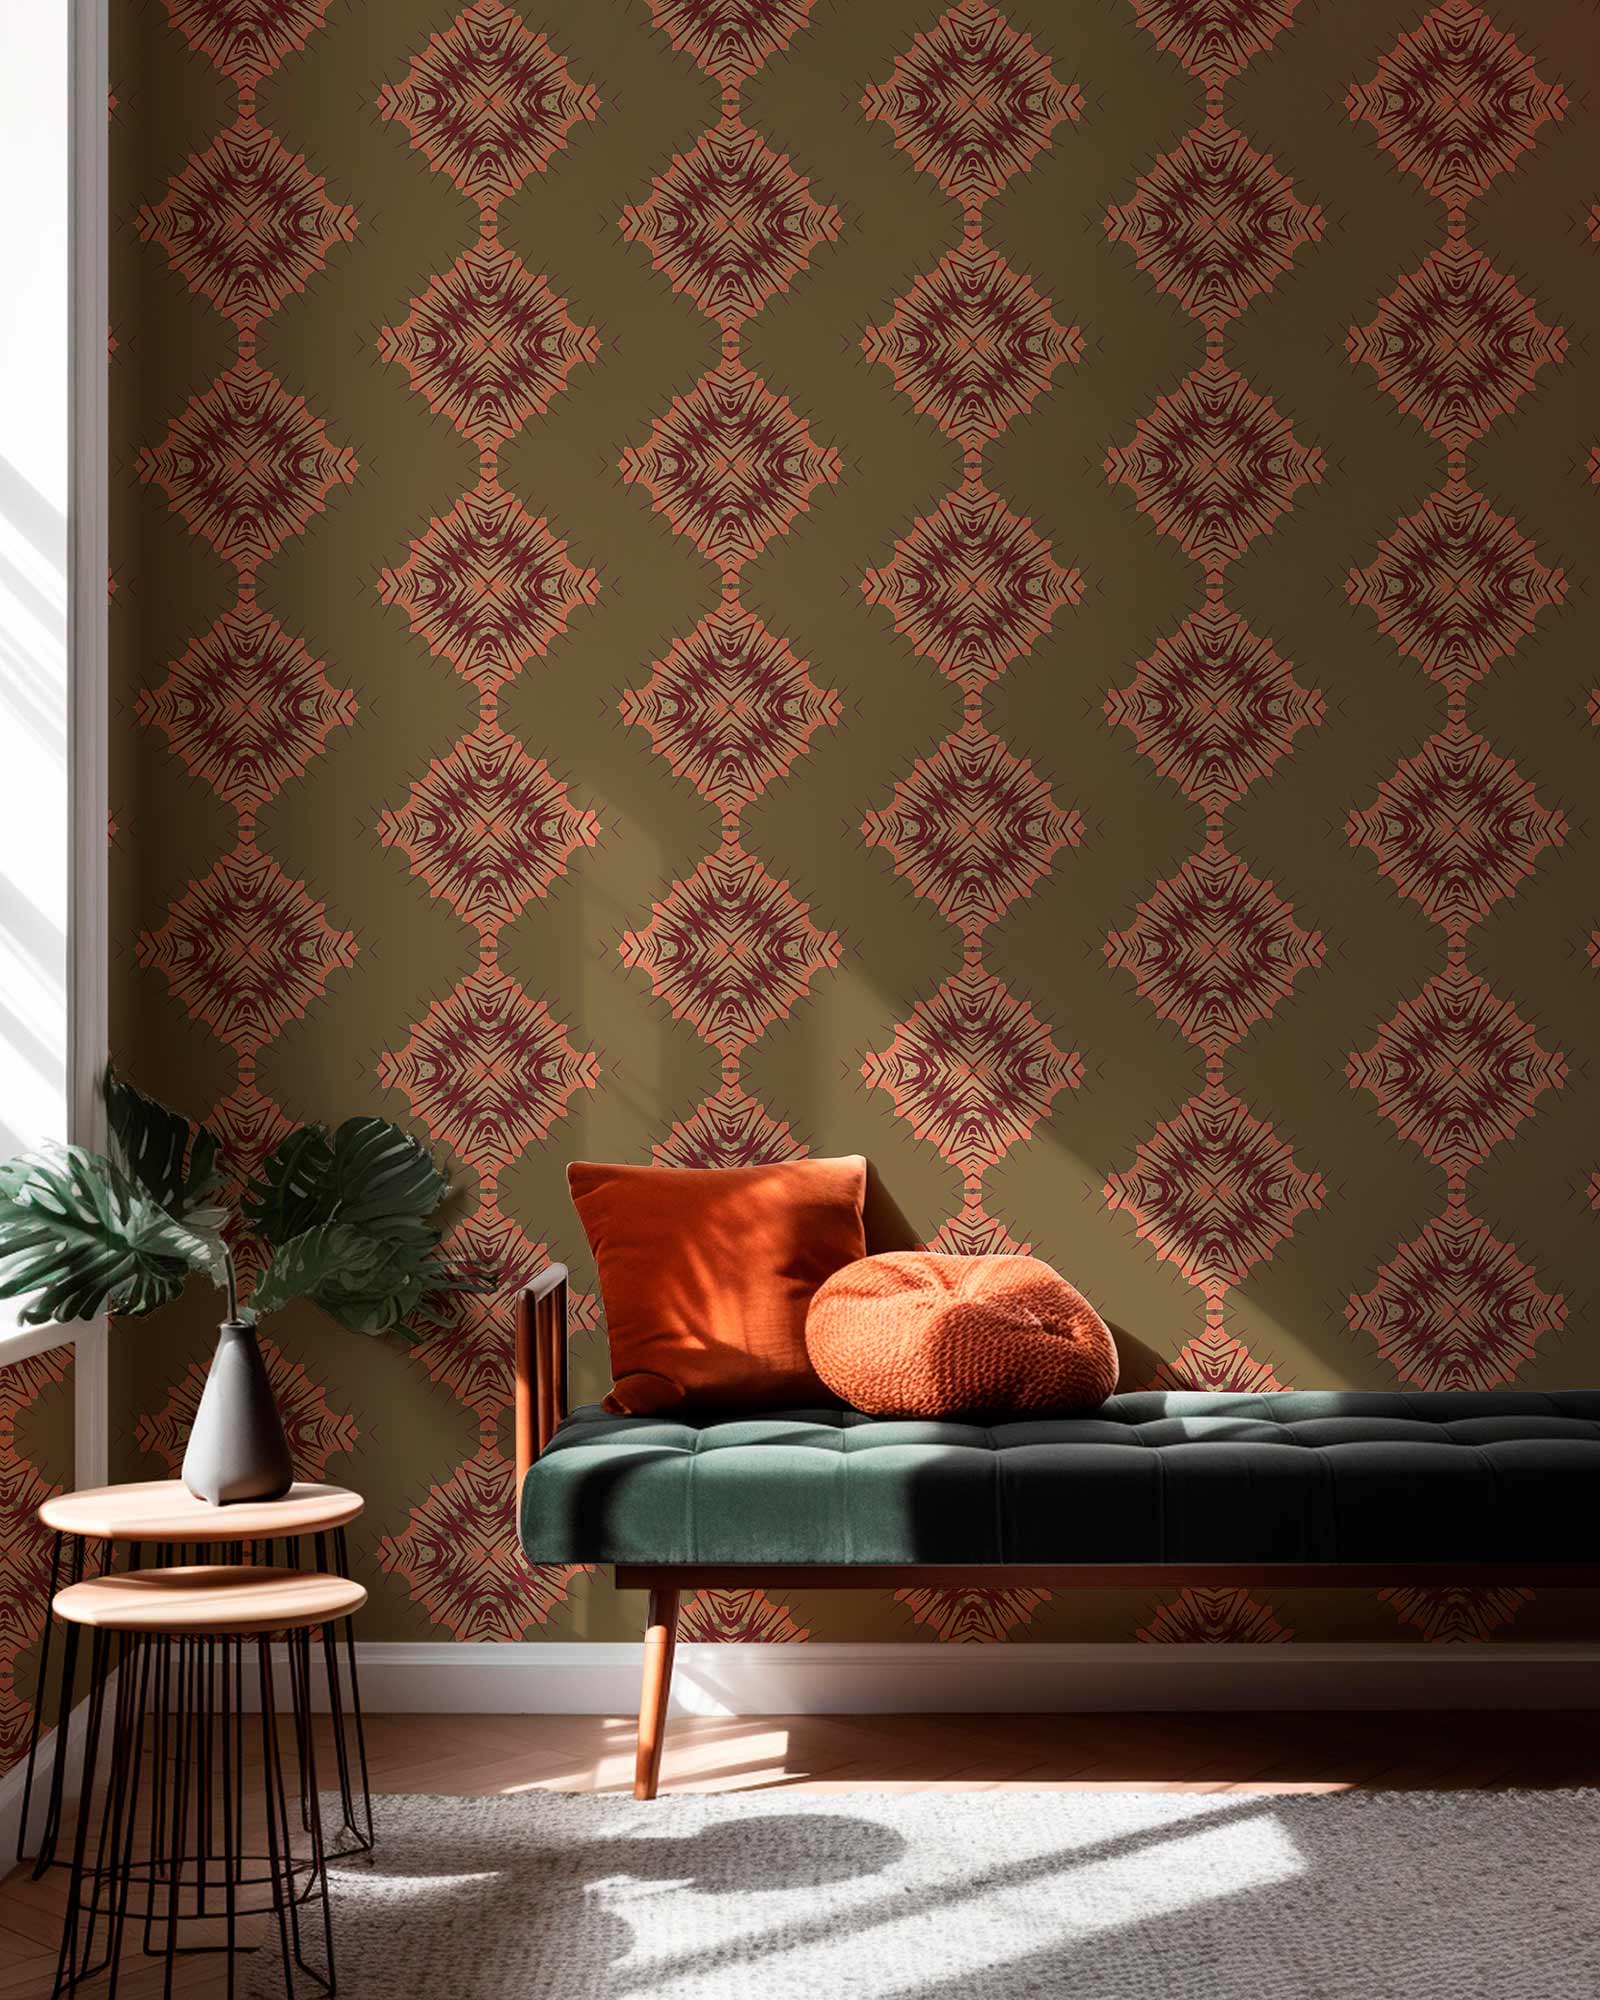 The California Collection of wallpapers and fabrics by Pearl & Maude features earthy neutral patterns for contemporary interior design